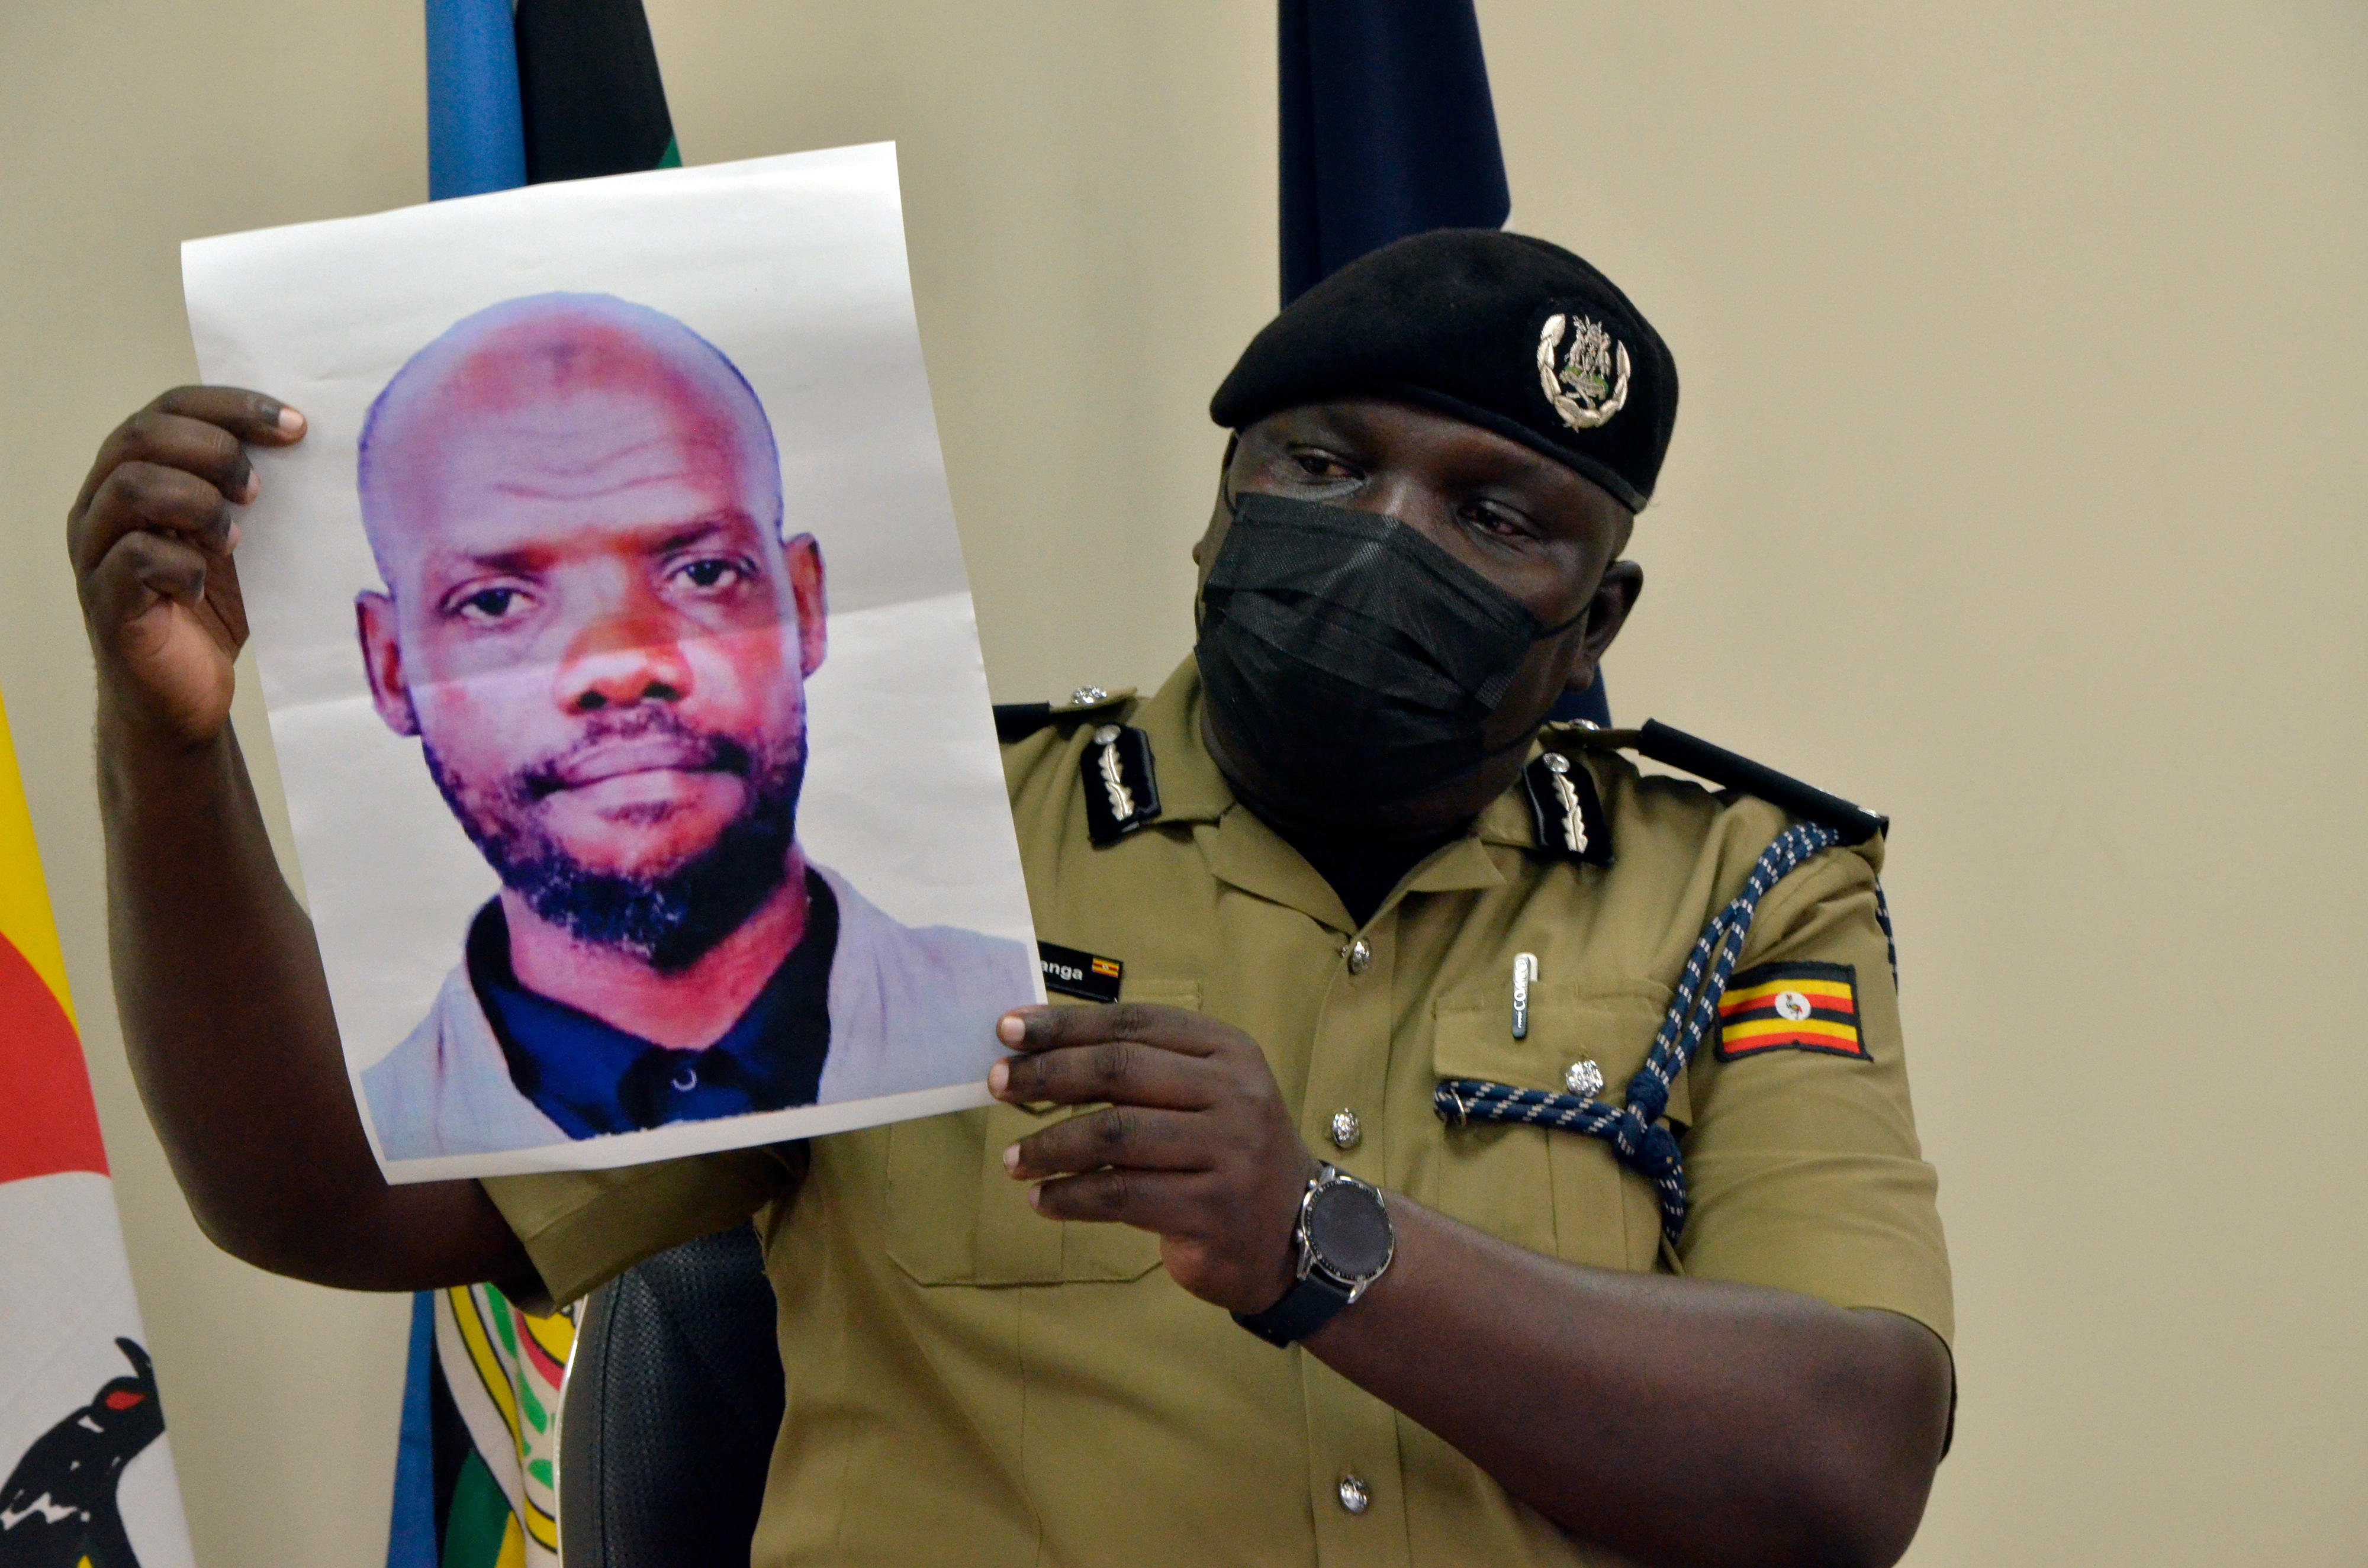 Shooters trailed Katumba for six months, police say